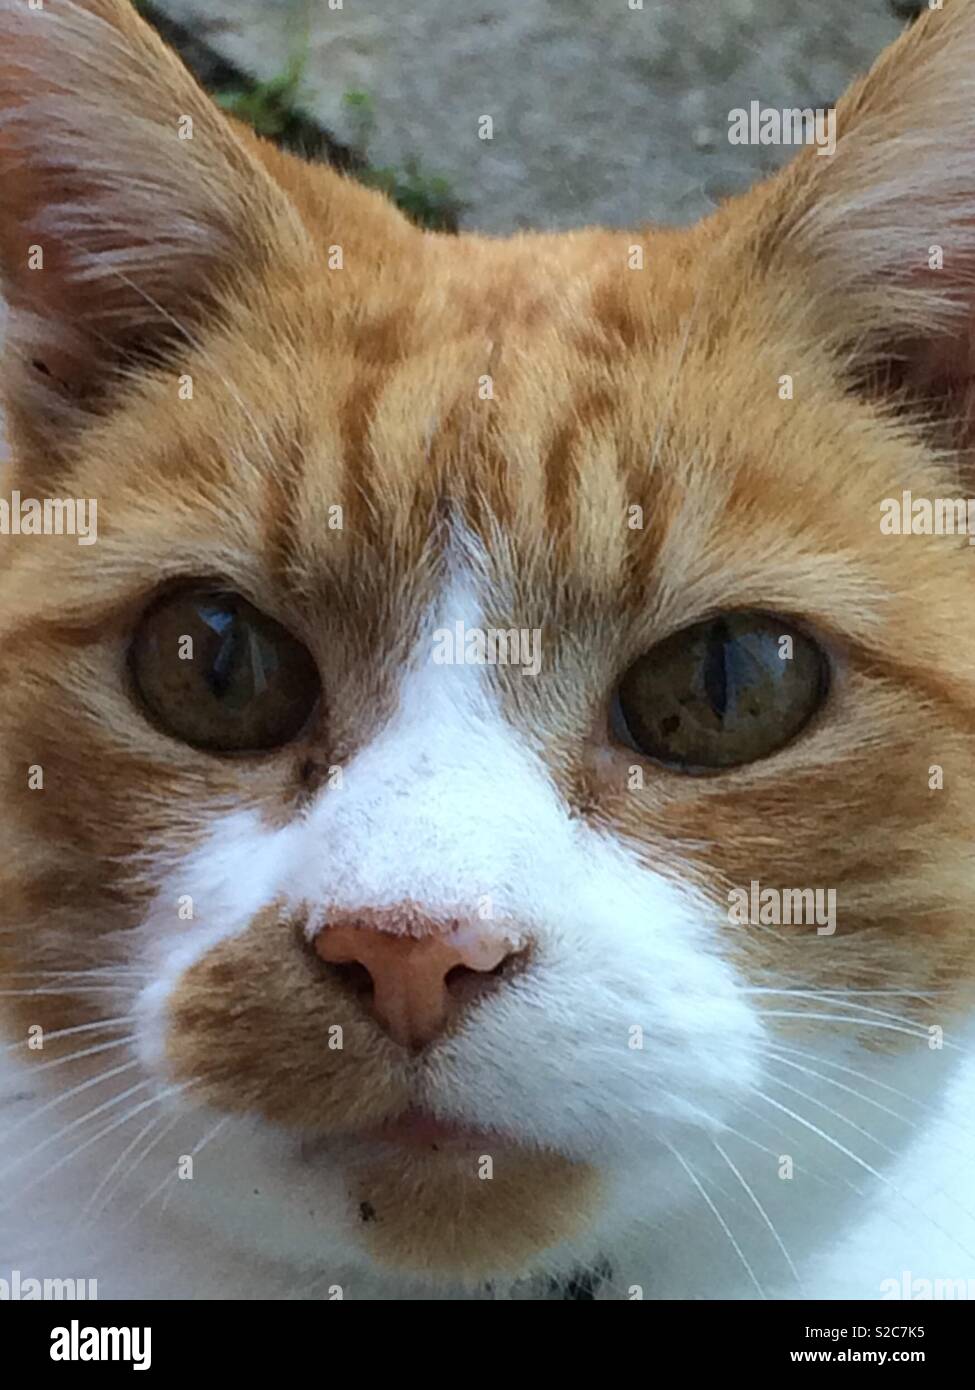 Ginger and white cat close up of face Stock Photo